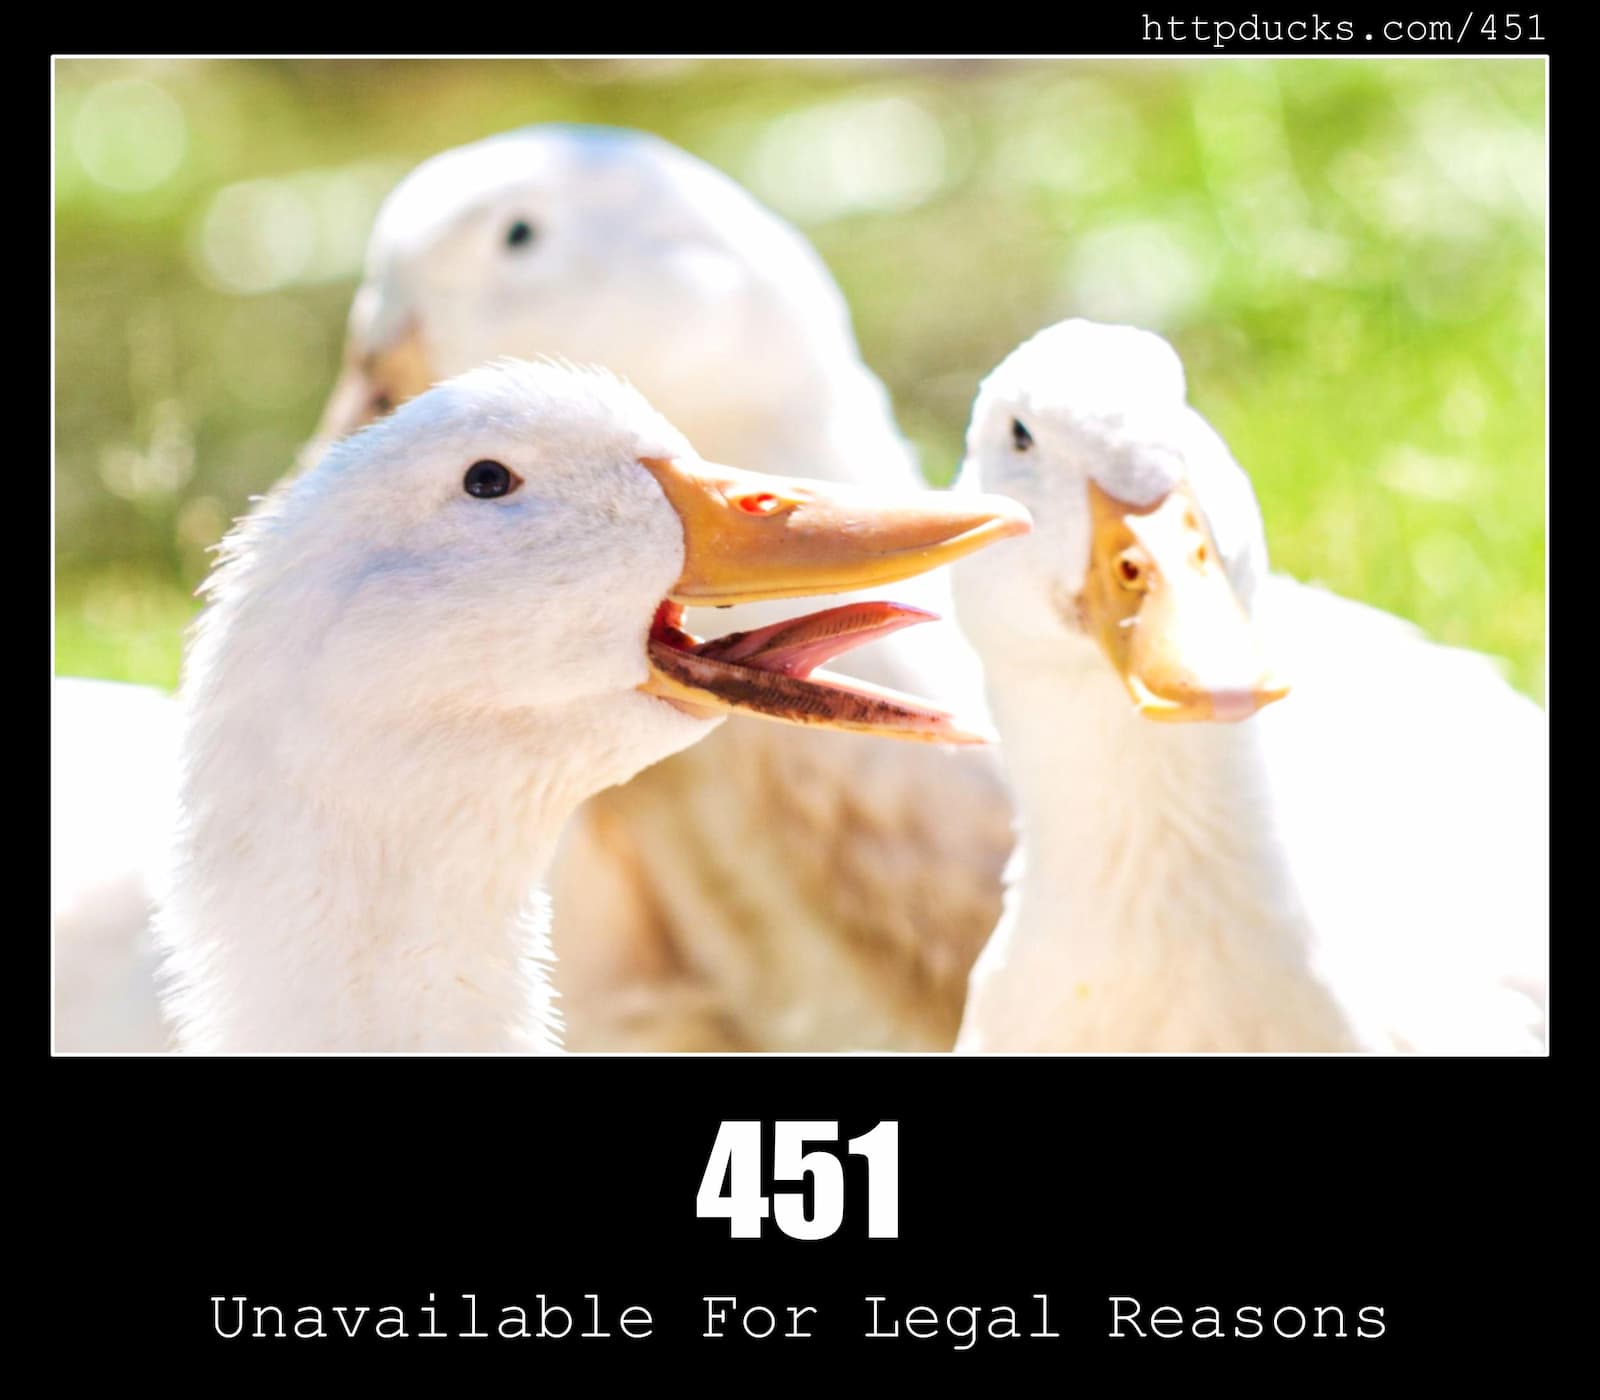 HTTP Status Code 451 Unavailable For Legal Reasons & Ducks